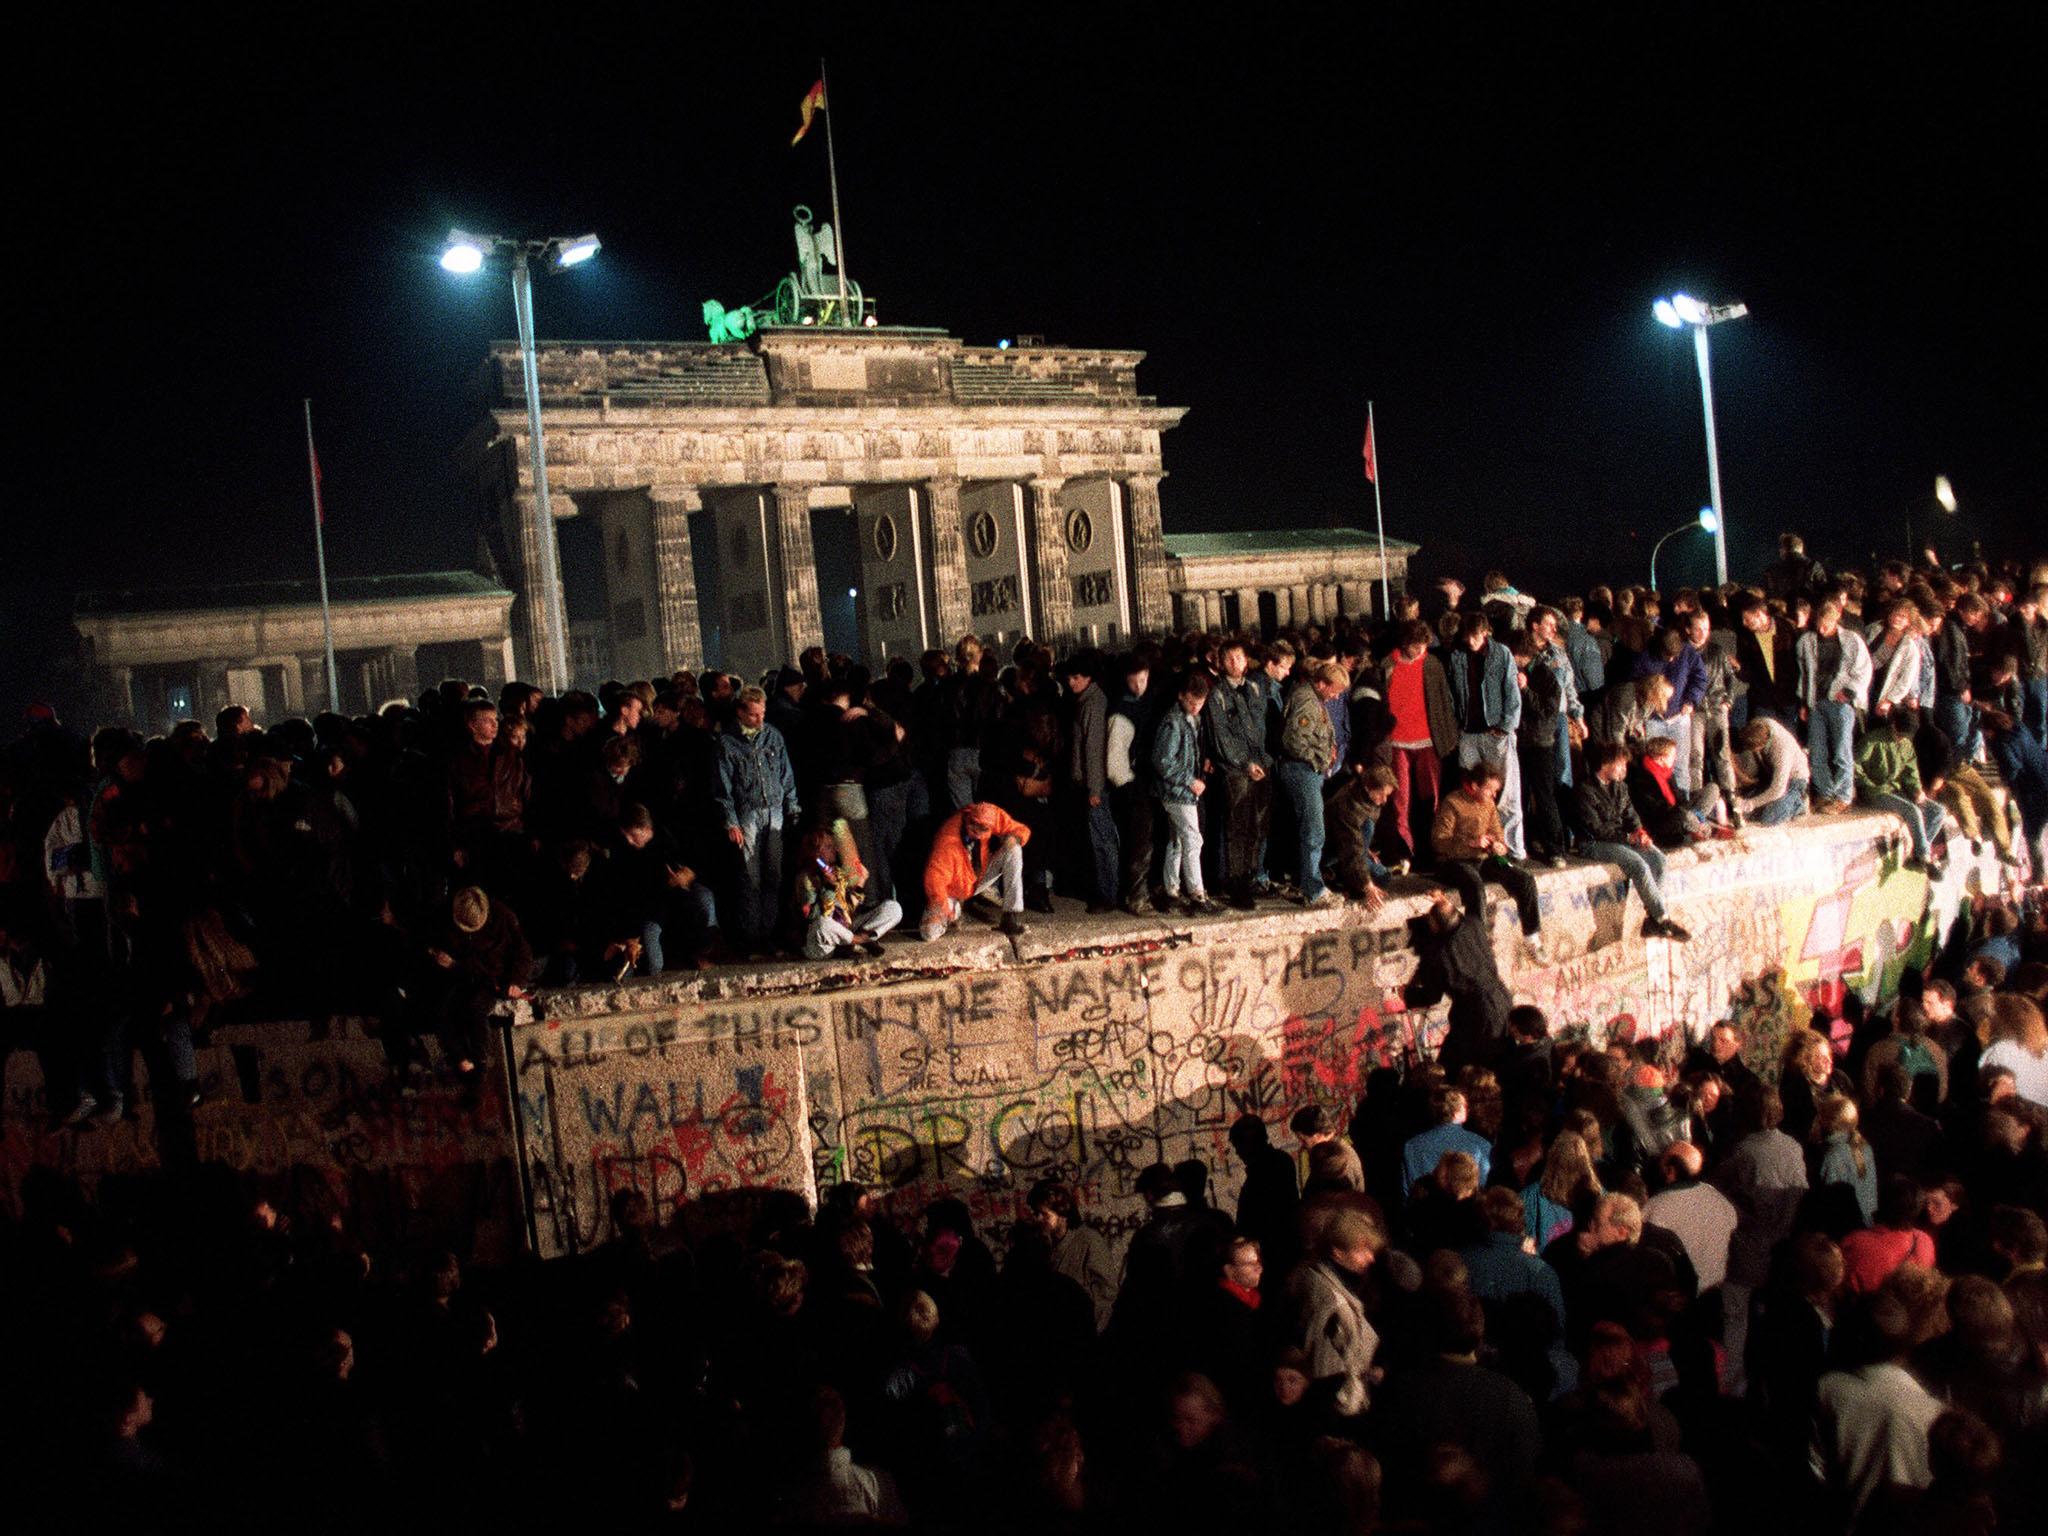 The 1989 uprising that saw the fall of the wall and the reunification of Germany has fostered a sense of inclusivity with the country’s European neighbours which is not mirrored across the English Channel